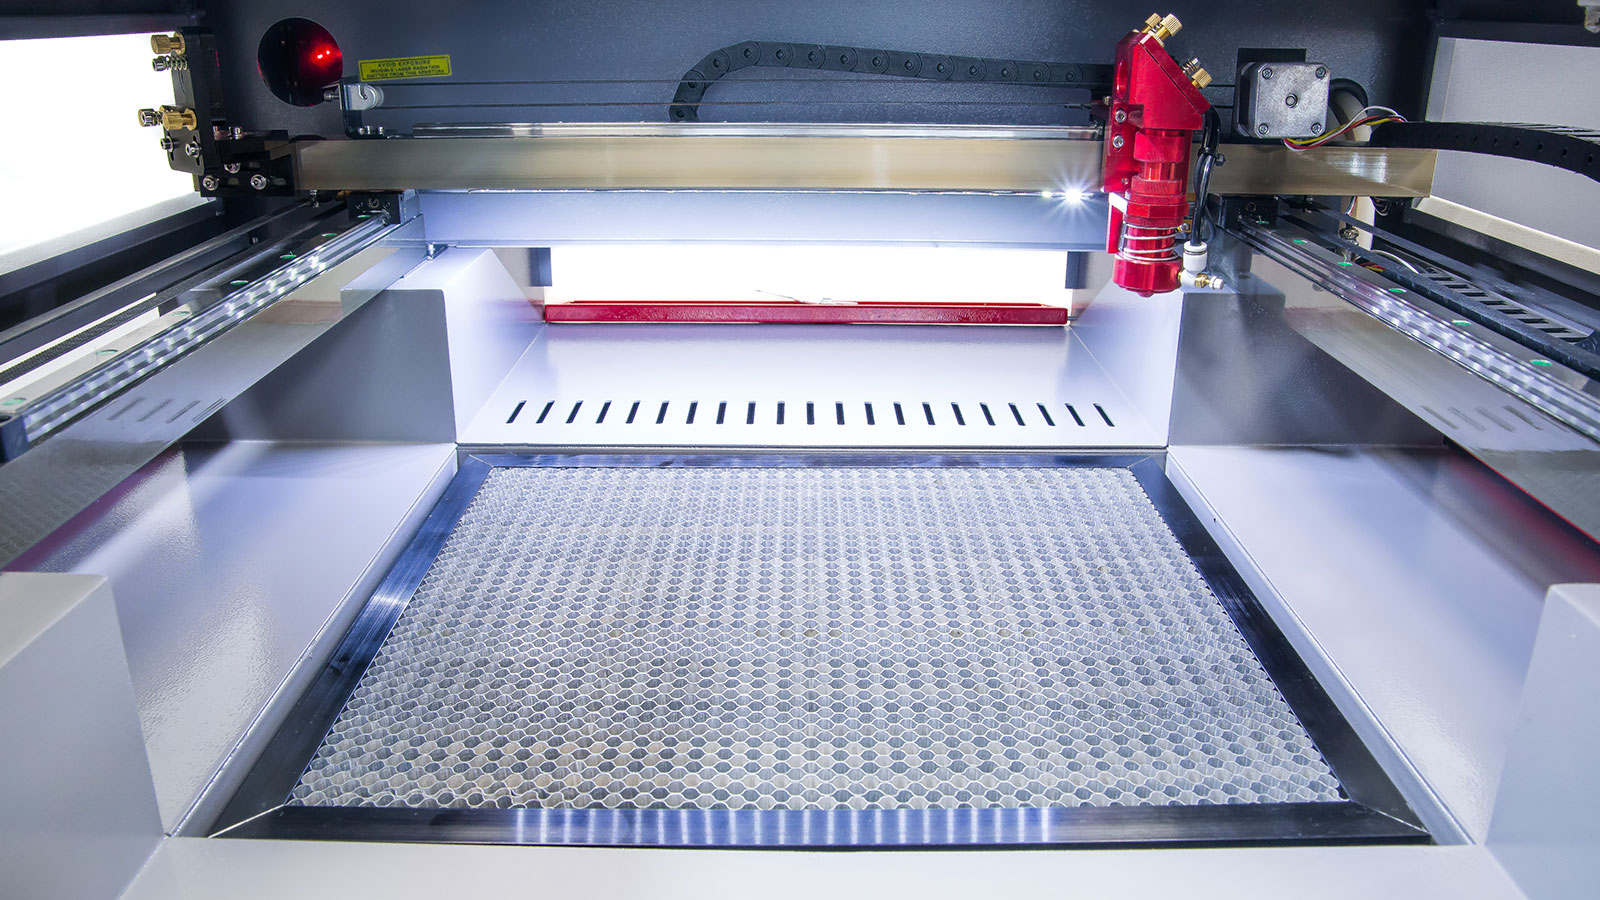 Boss LS-3655 CO₂ Laser Cutter and Engraver 155 Watts of Power